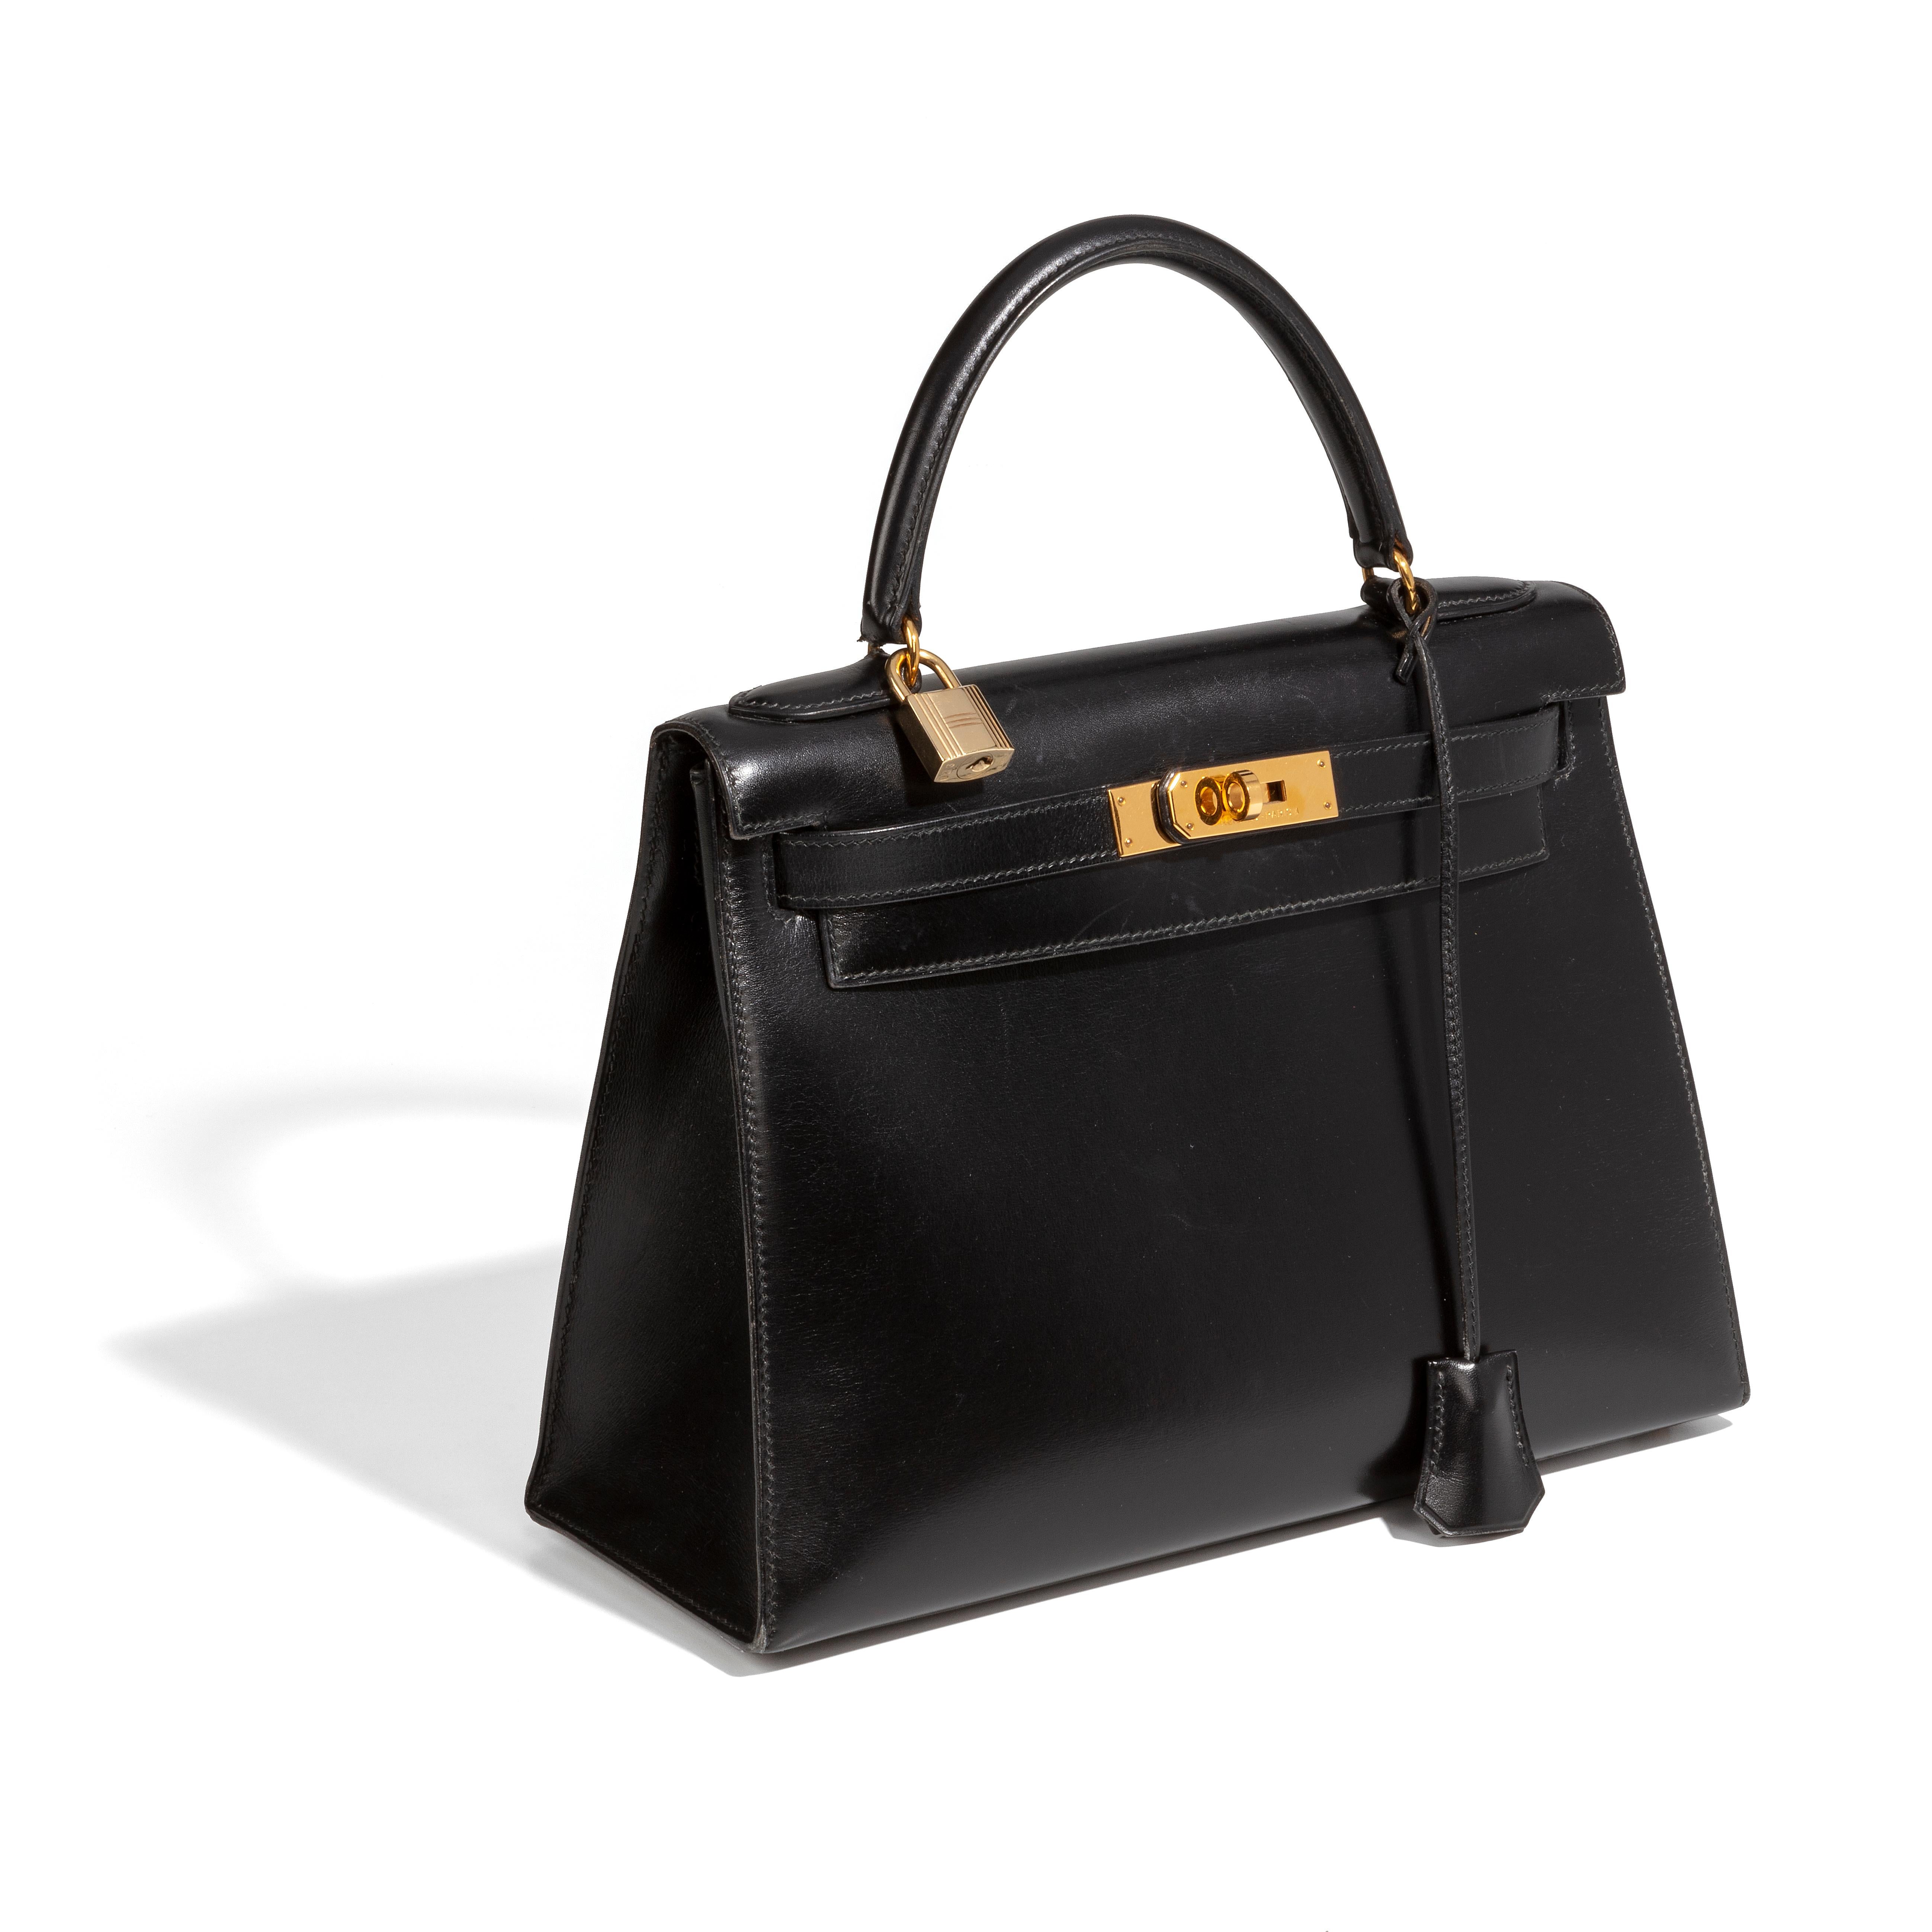 This black 28cm Kelly bag from Hermès is a true testament to the quality of the house's craftsmanship, exuding timeless style and elegance, perfect for any occasion with Box Calf leather and beautiful brushed palladium gold-tone hardware. The piece